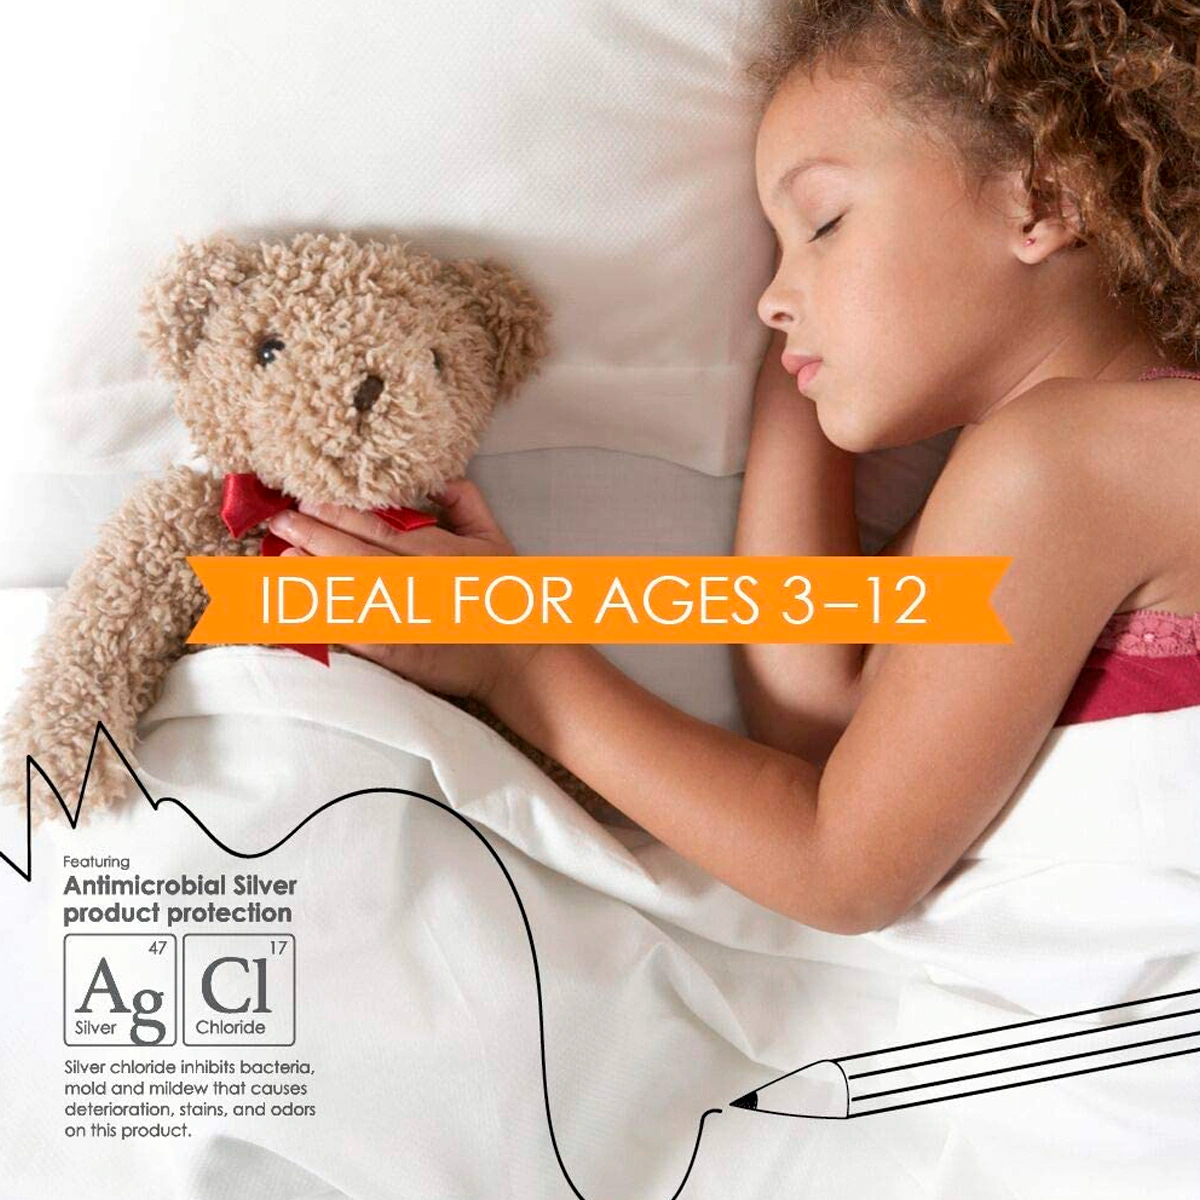 Kids Mattress Protector by Purecare Ideal ages